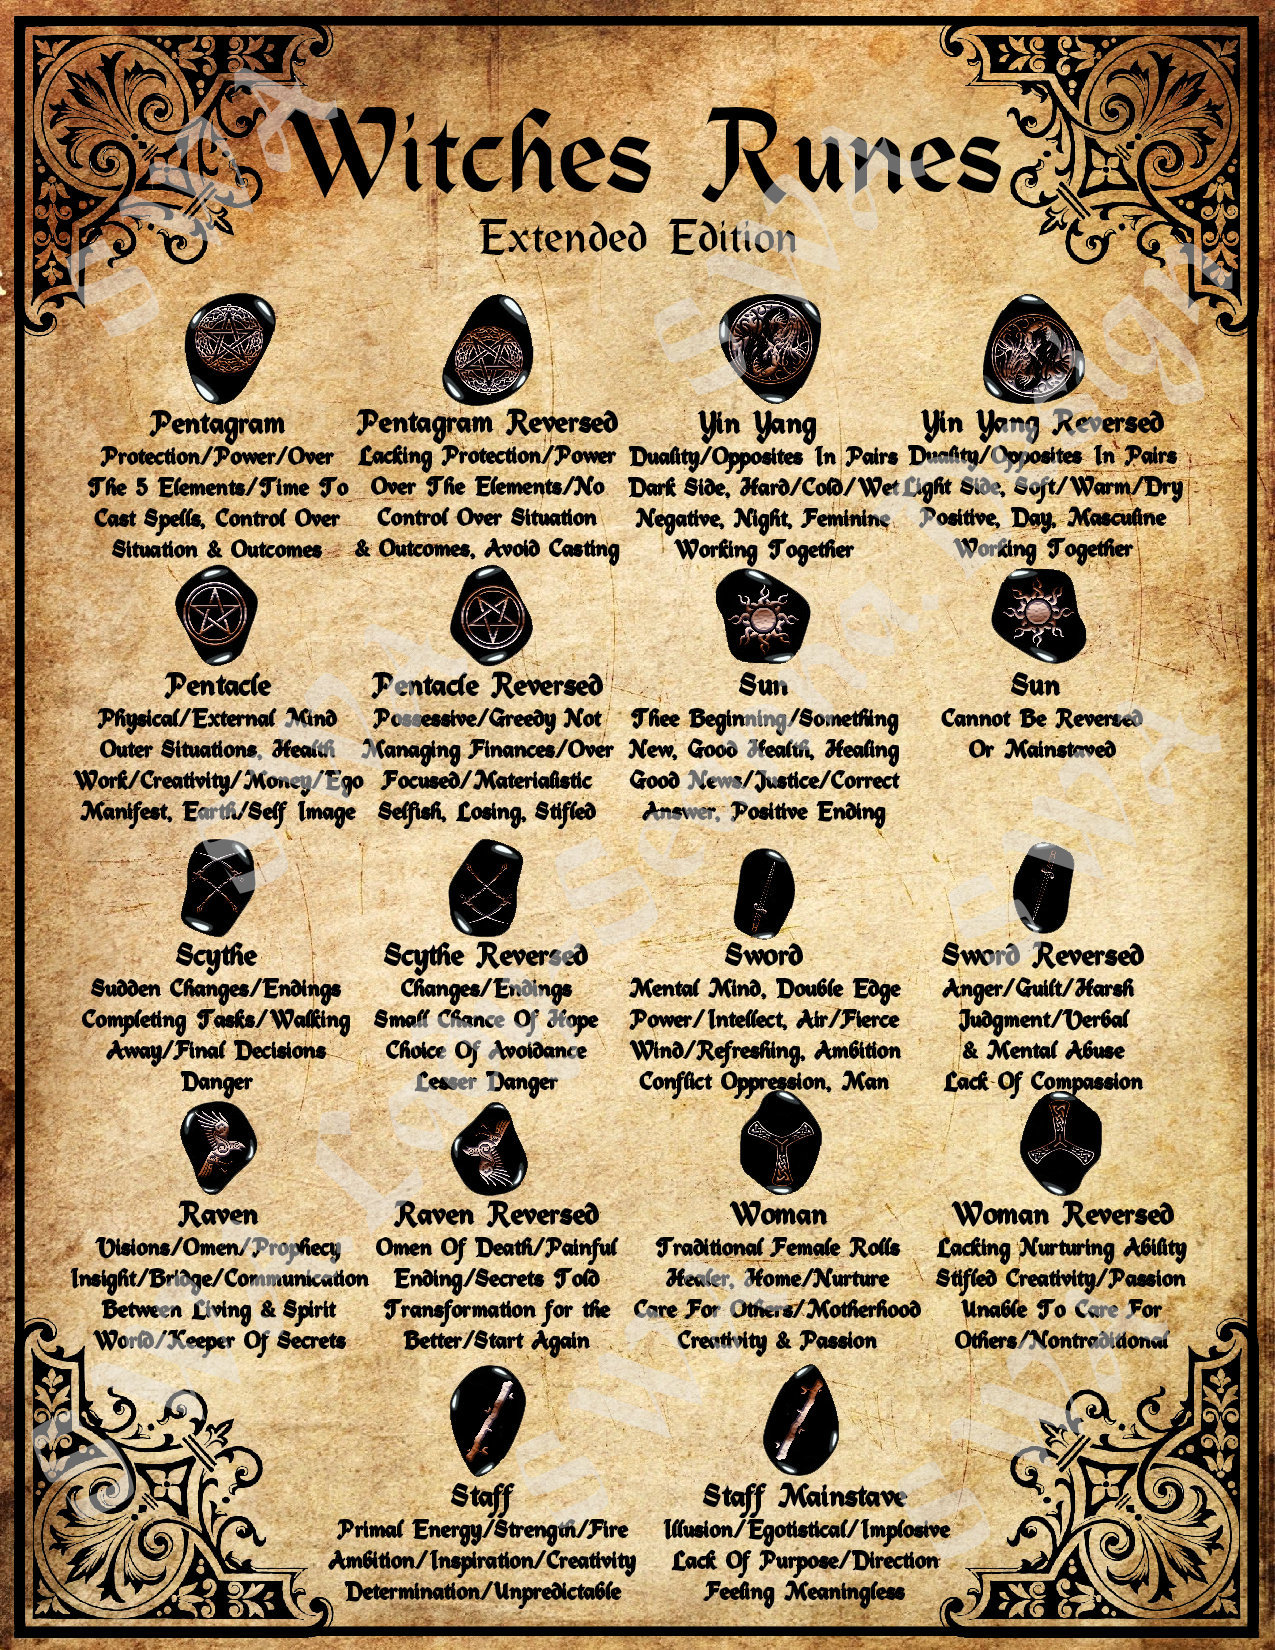 Witches Runes Stone Cards Meaning Correspondents BOS Book of